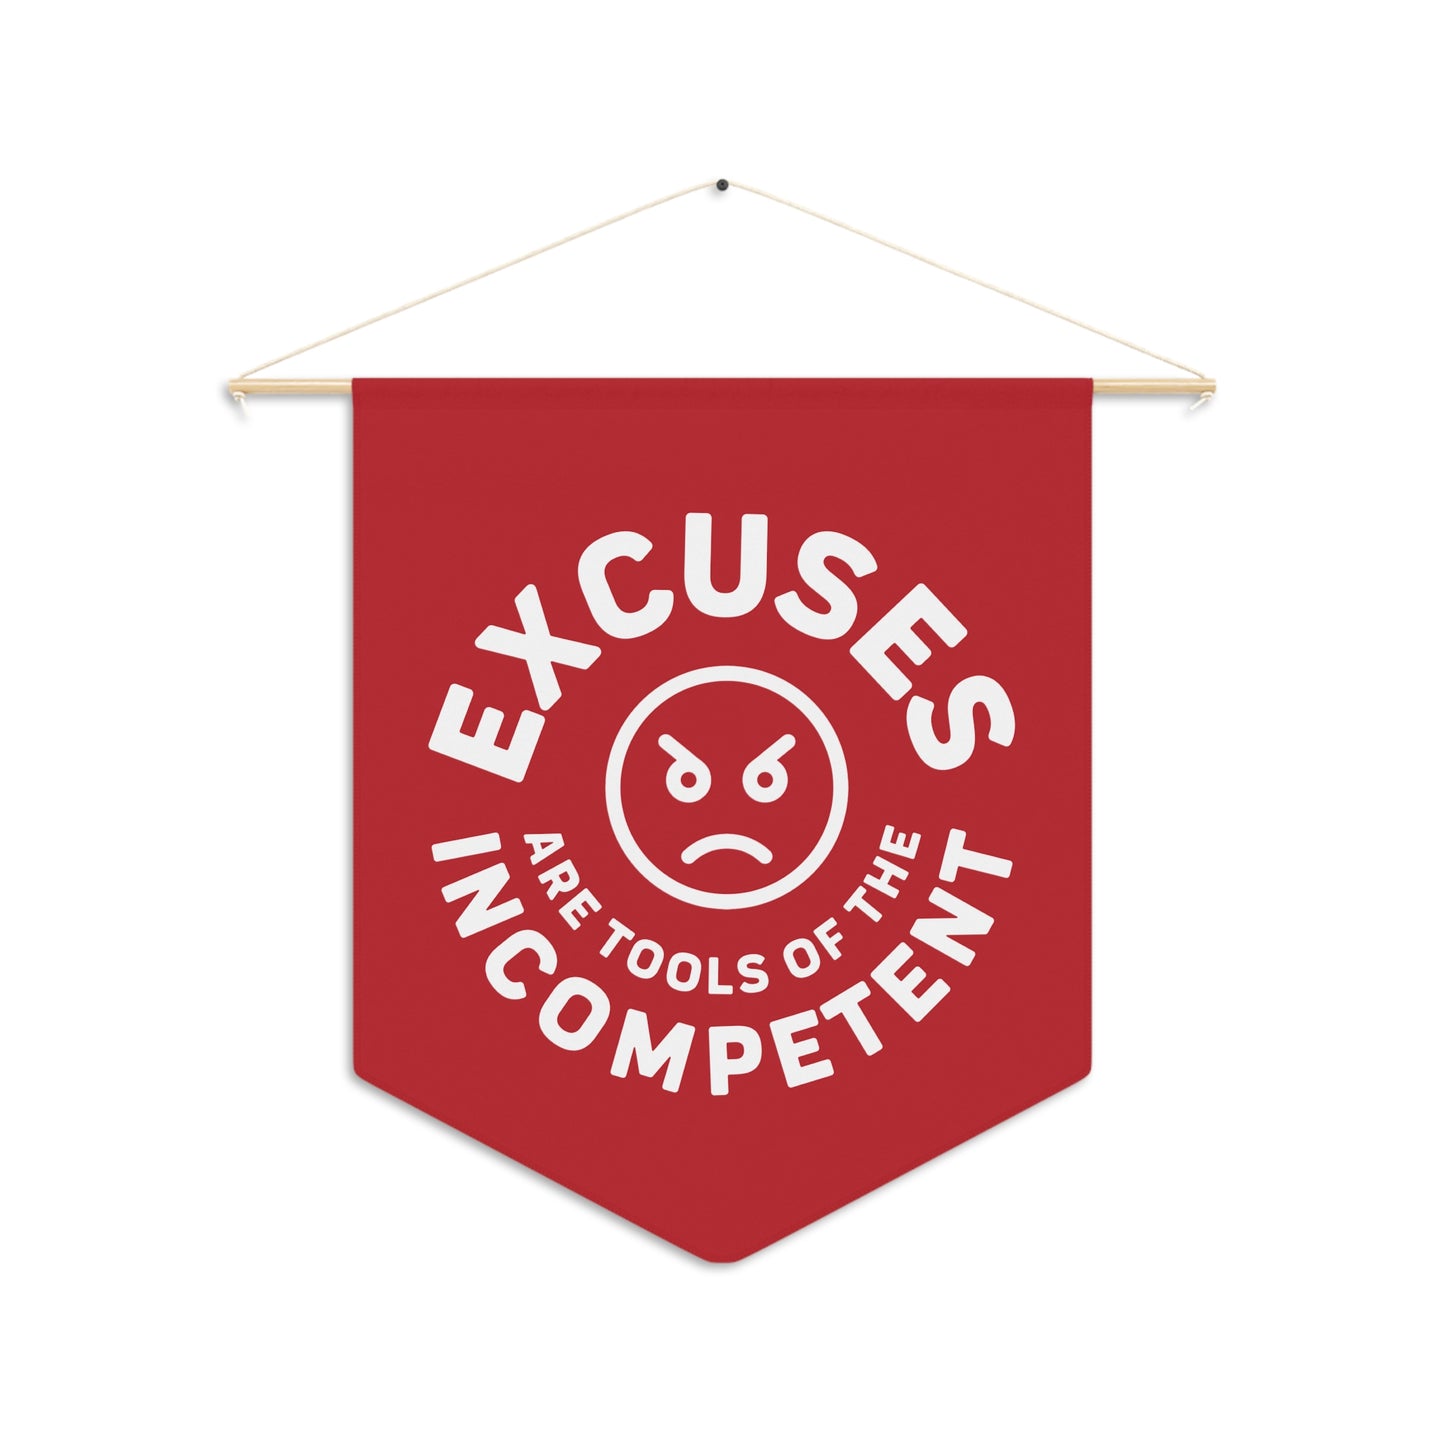 Excuses Pennant - White on Red